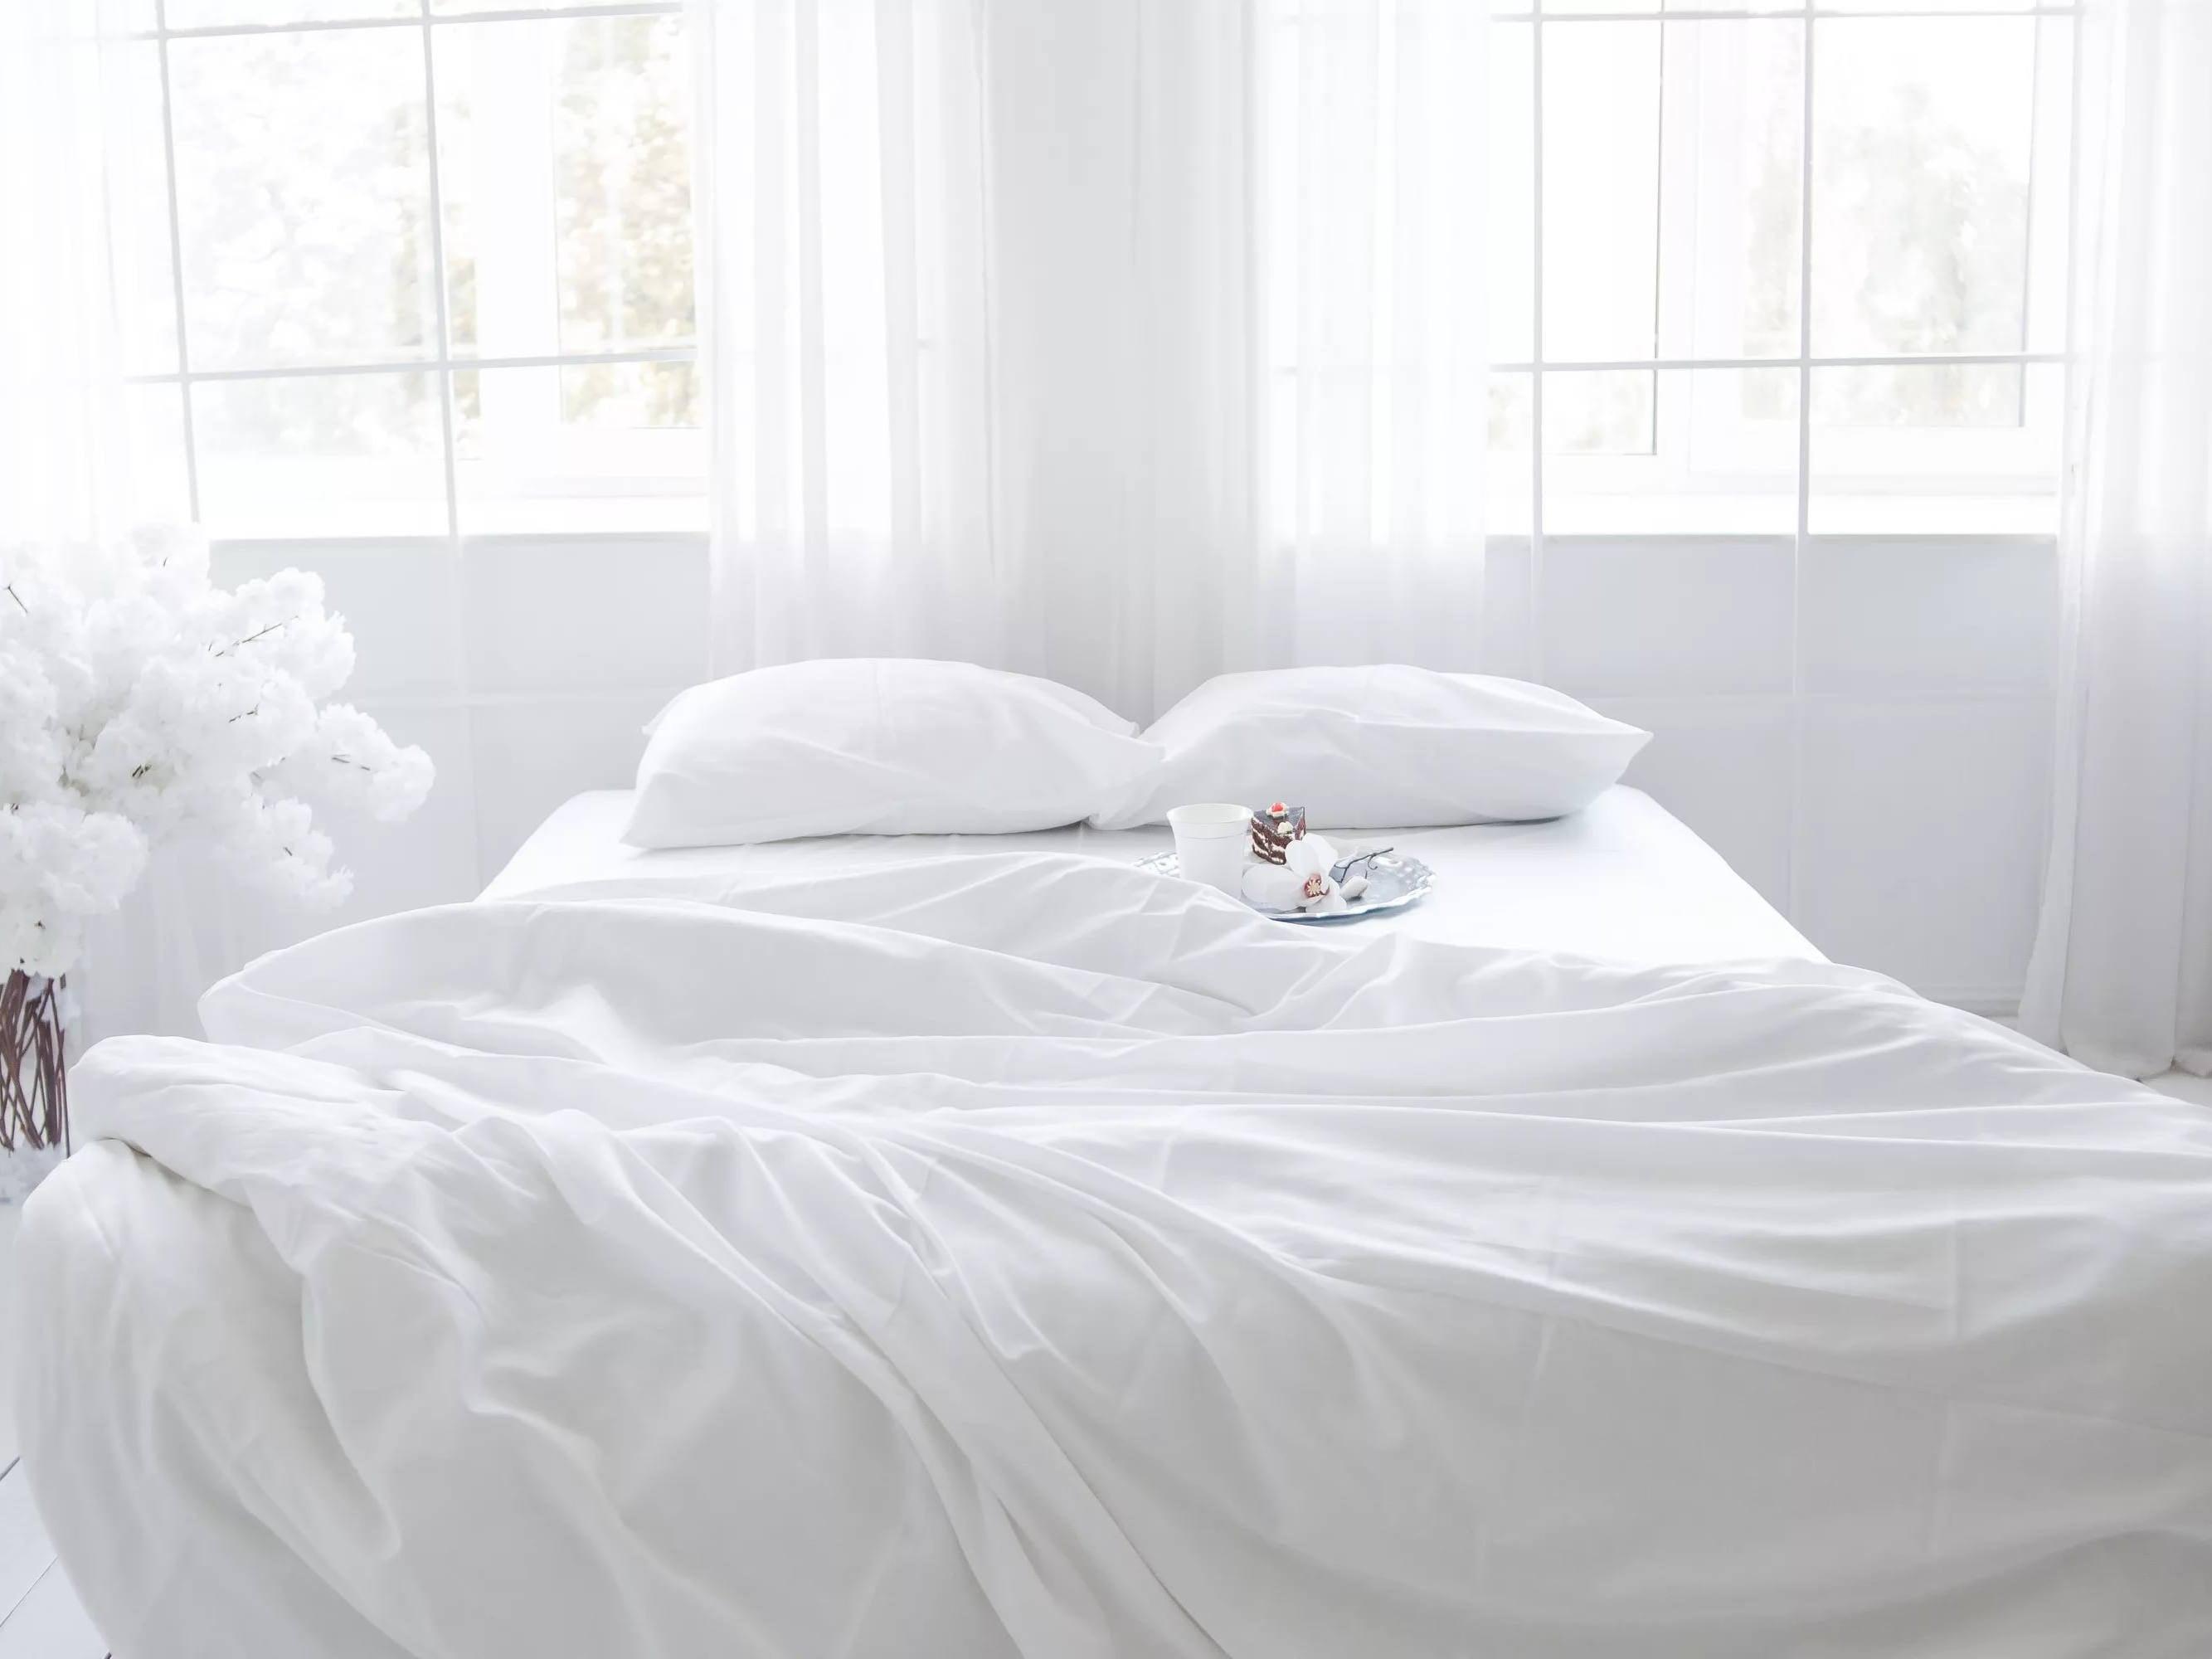 Wallace Cotton - Stay in bed - snuggle in with our Paper Moon duvet cover  set. Made from organic cotton, the Paper Moon bedding is a reversible,  sustainable choice. ​Shop our collection